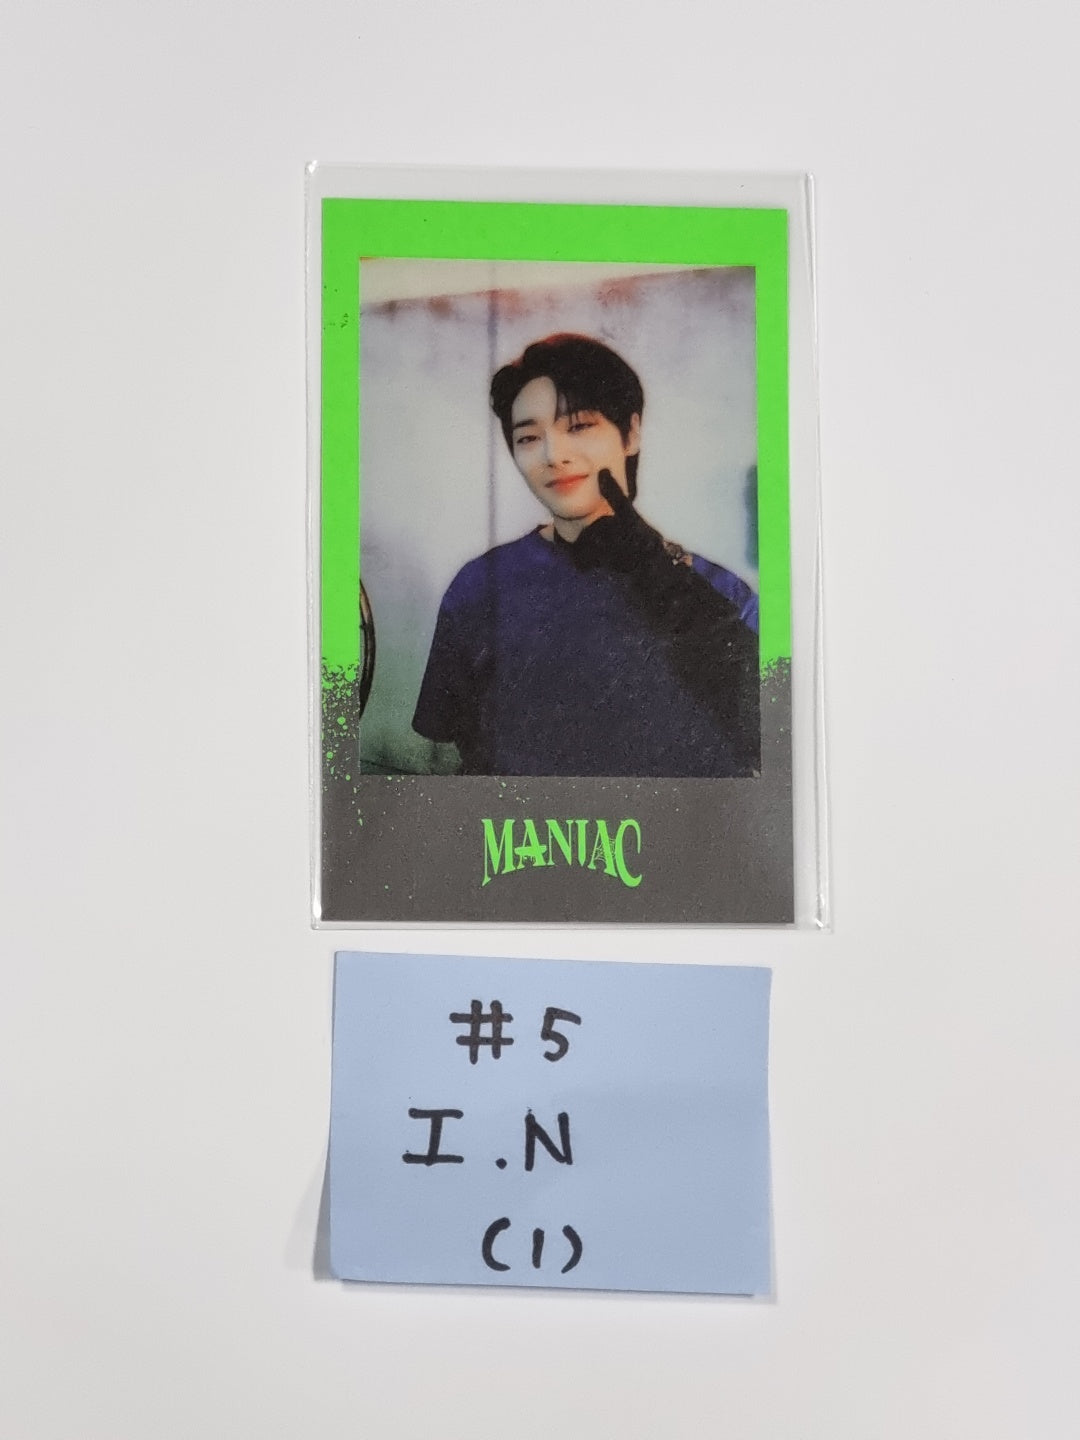 Stray Kids - 2nd World Tour merch [MANIAC] IN SEOUL Pre-order Benefit Polaroid Type Photocard [Updated 8/17]